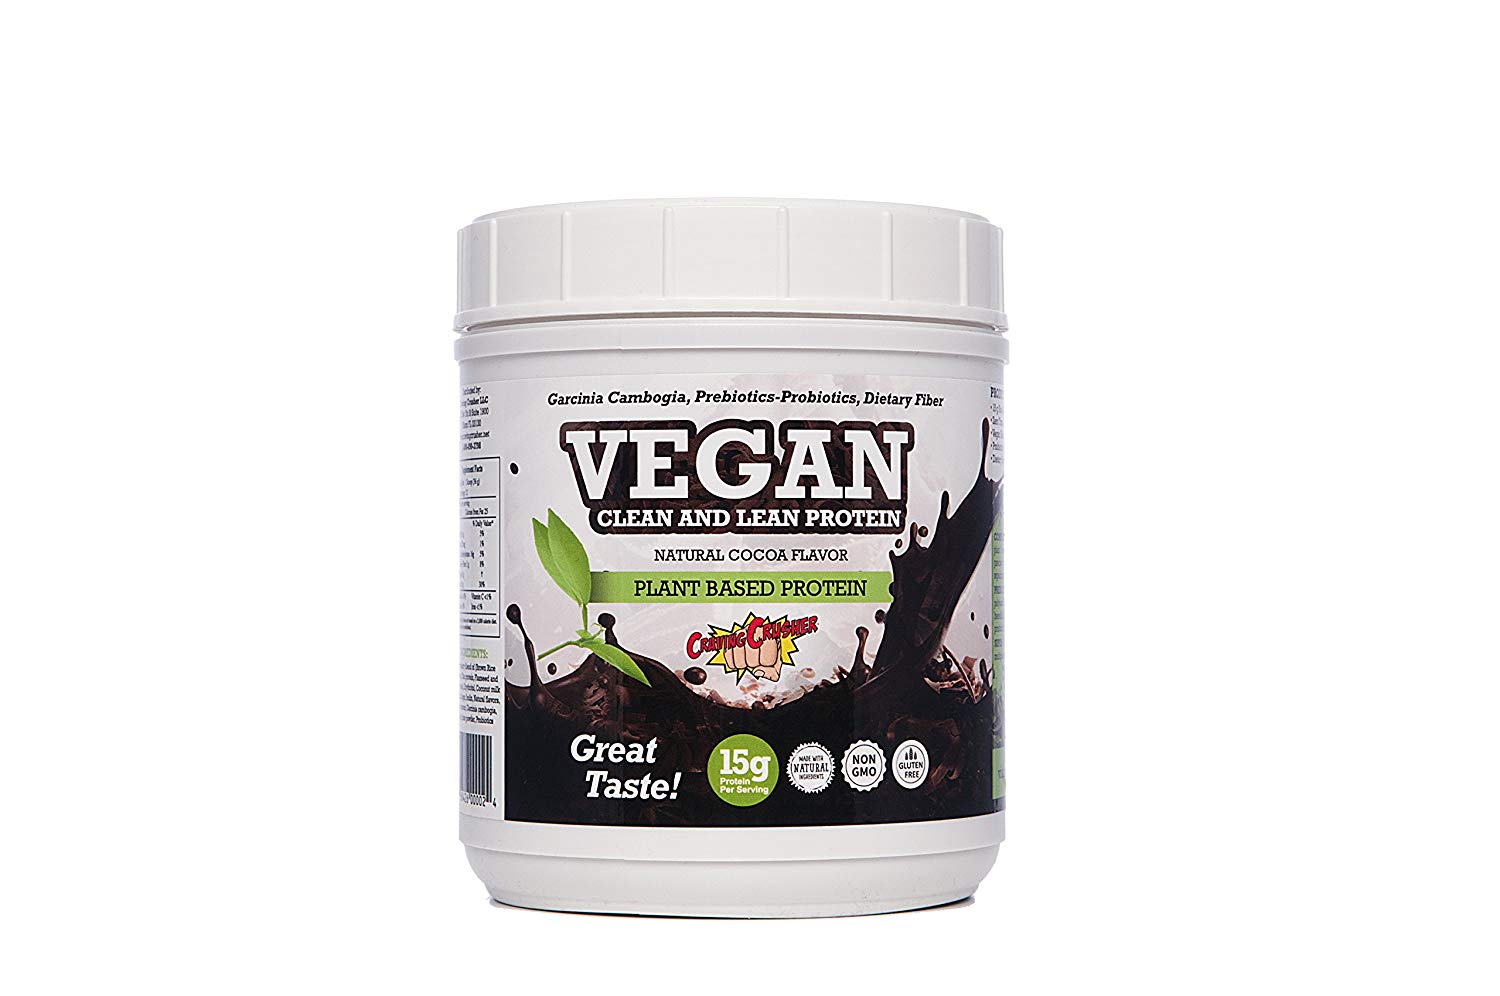 CRAVING CRUSHER: Vegan Clean and Lean Protein Powder, 55 oz - Vending Business Solutions